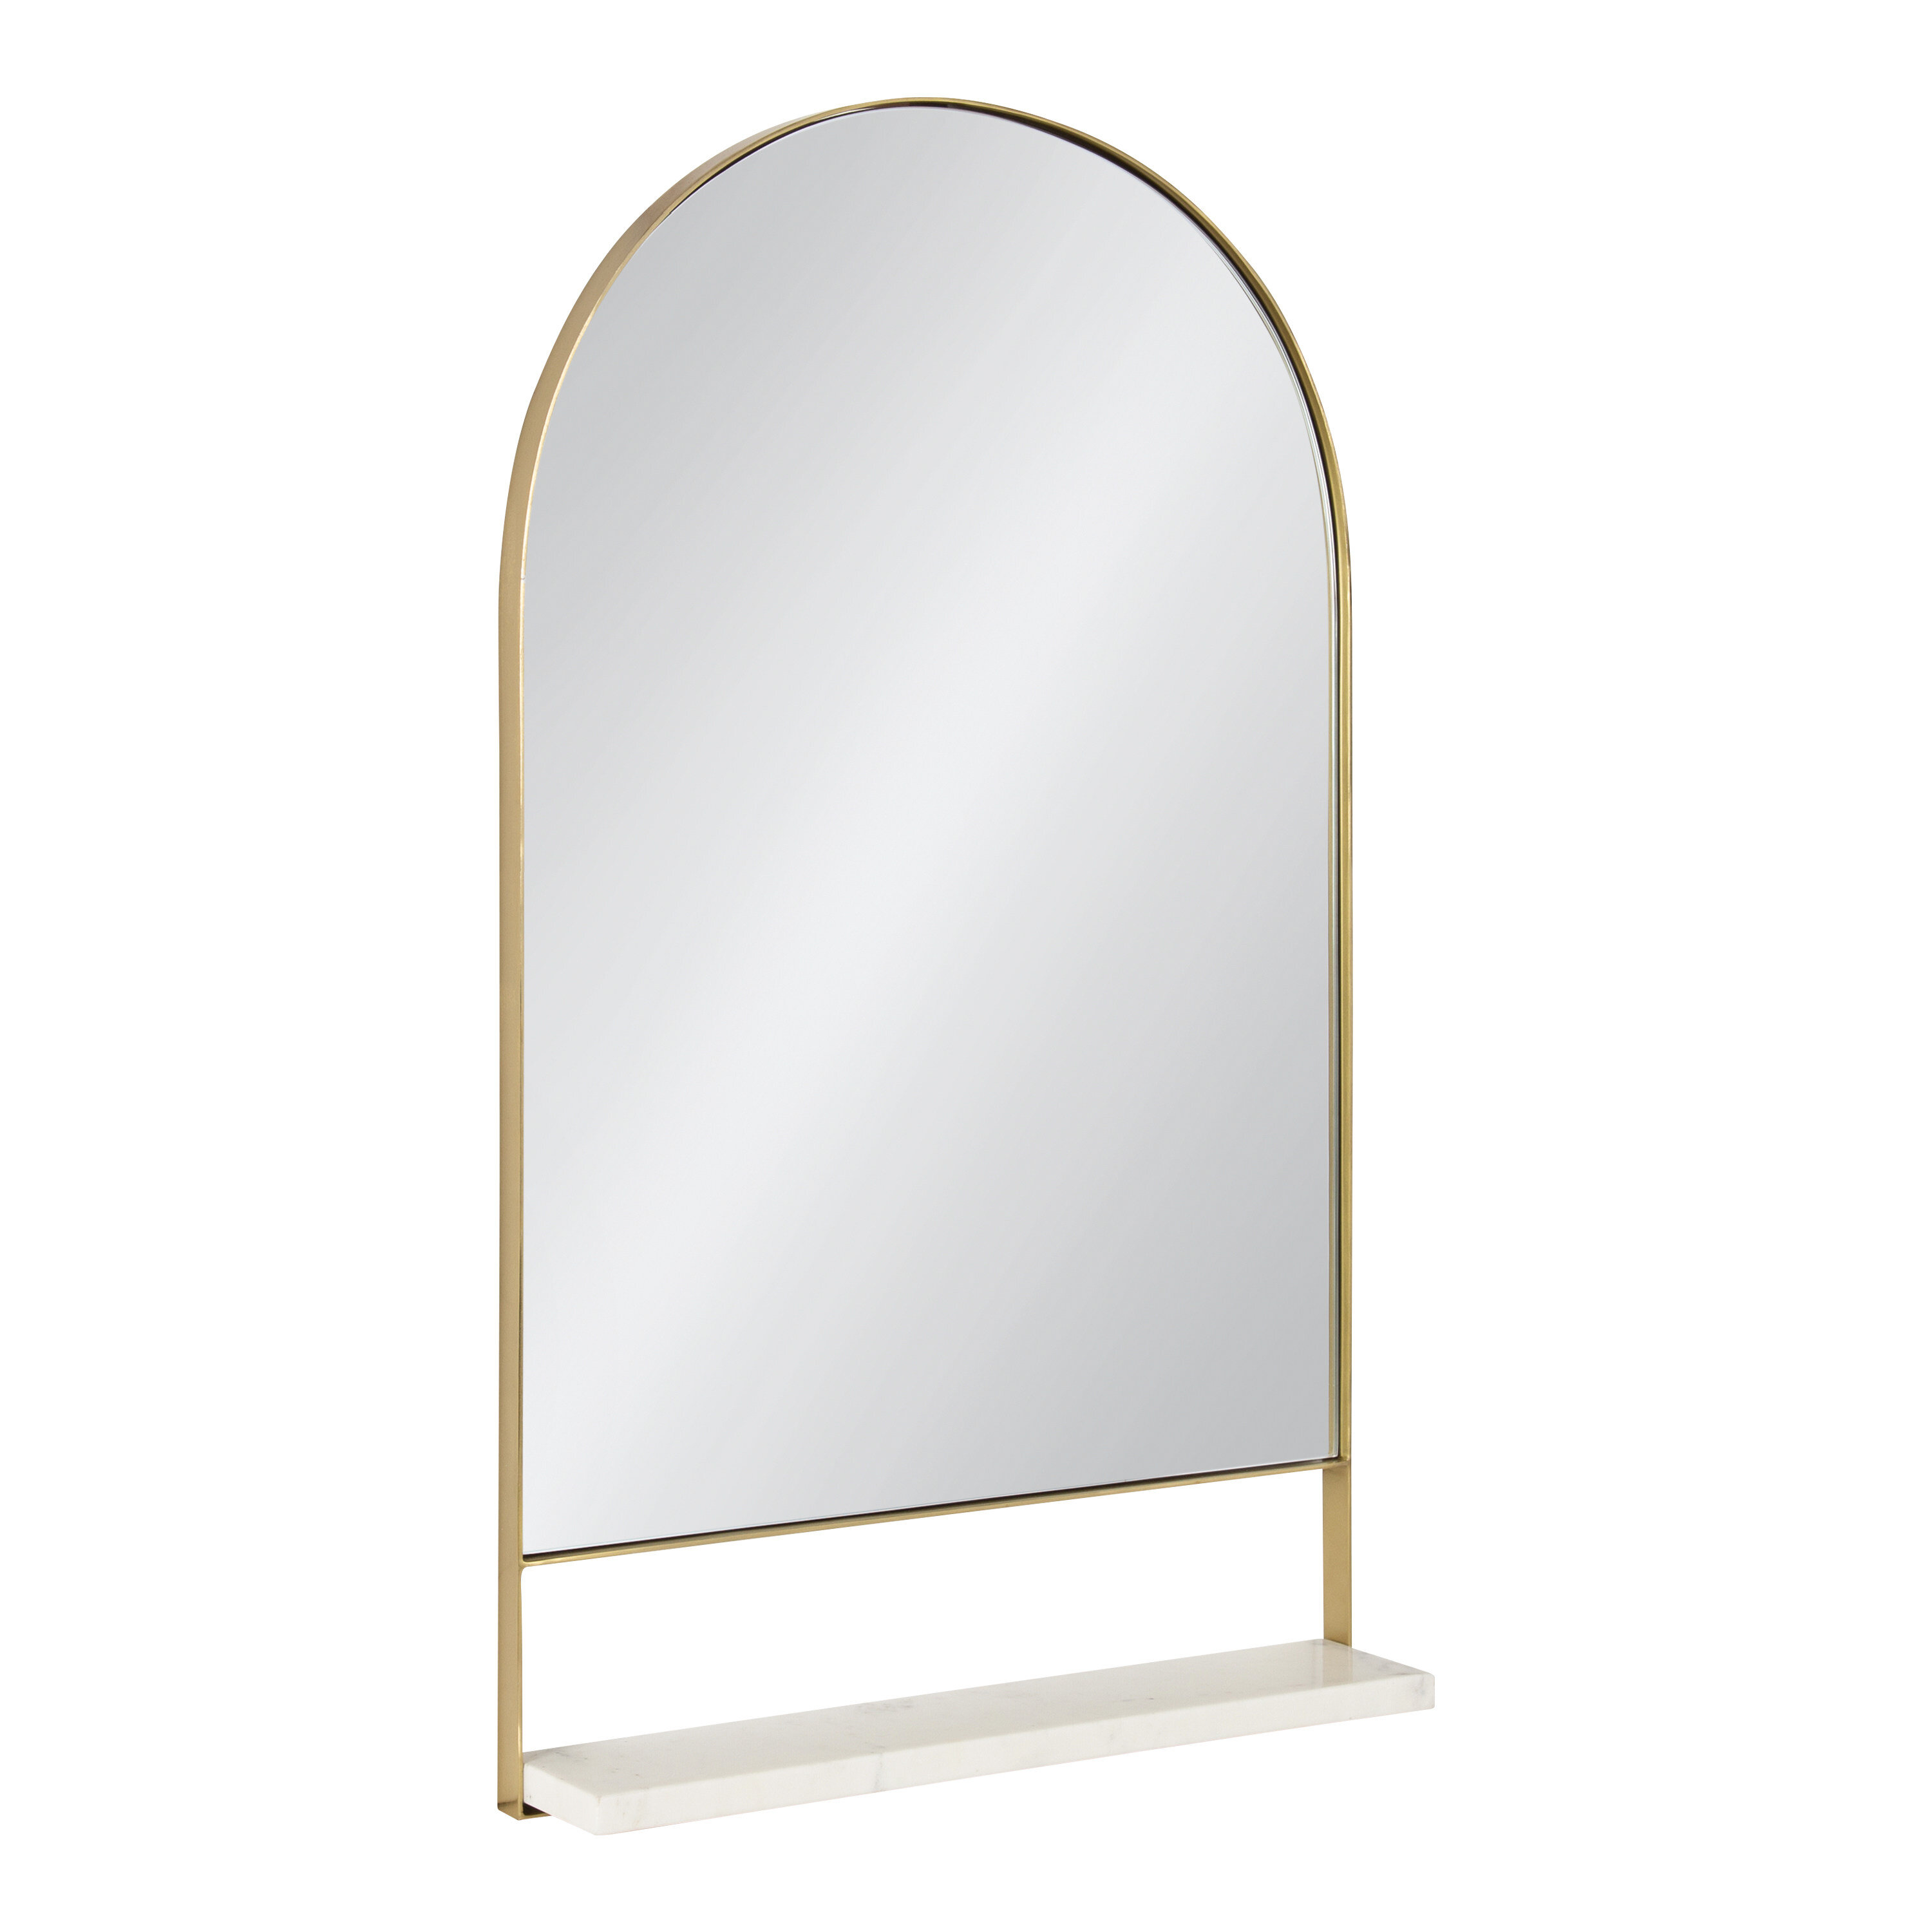 Form Mirror With Hooks For Bathroom & Walls Off White 48 x 31CM 